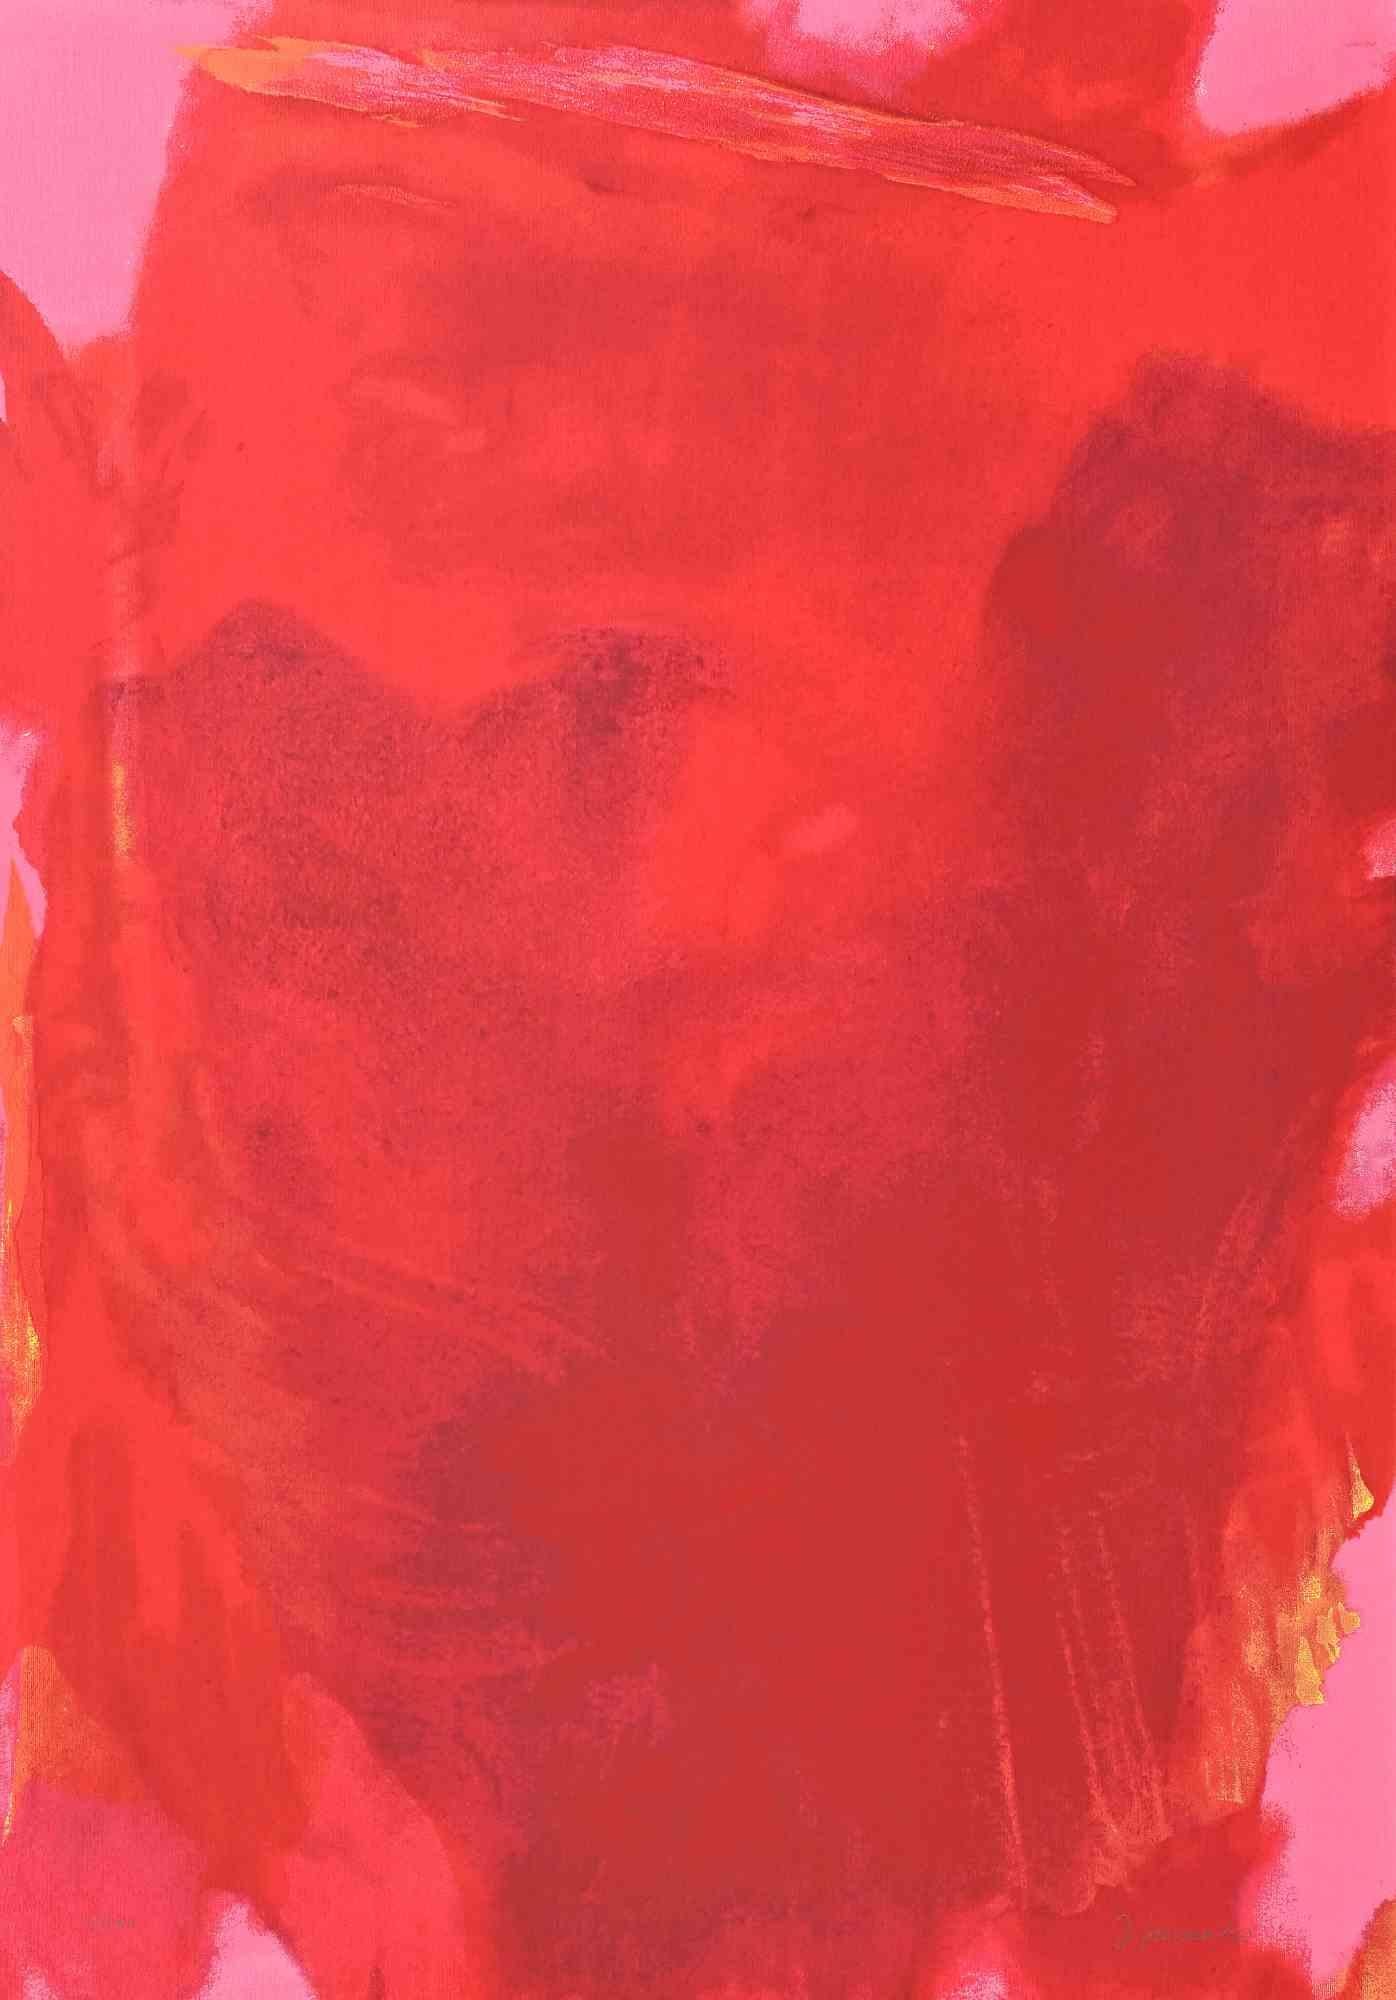 The Visible of the Invisible - Red Composition- Screenprint by I. Bressan - 1989